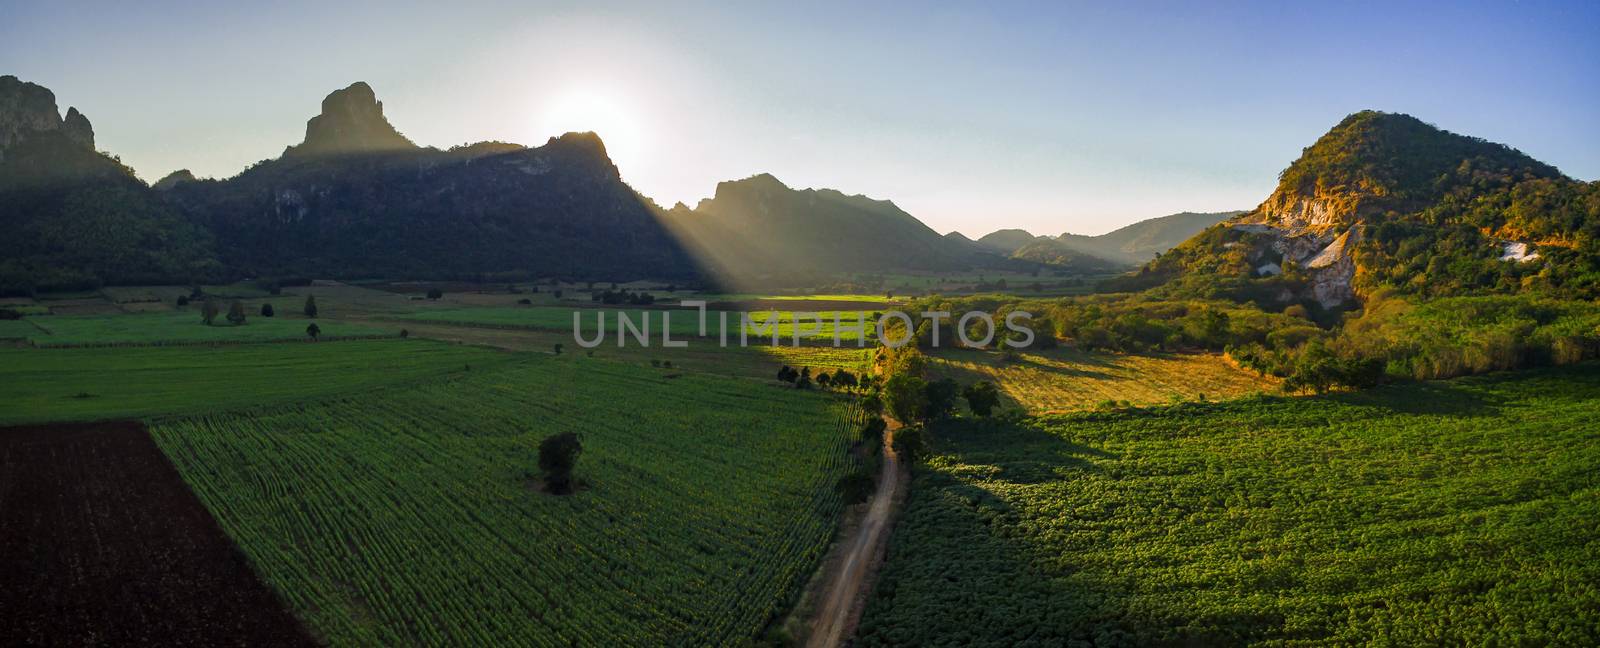 beautiful sun light on sunflowers and agriculture field in lime stone mountain valley lopburi central of thailand